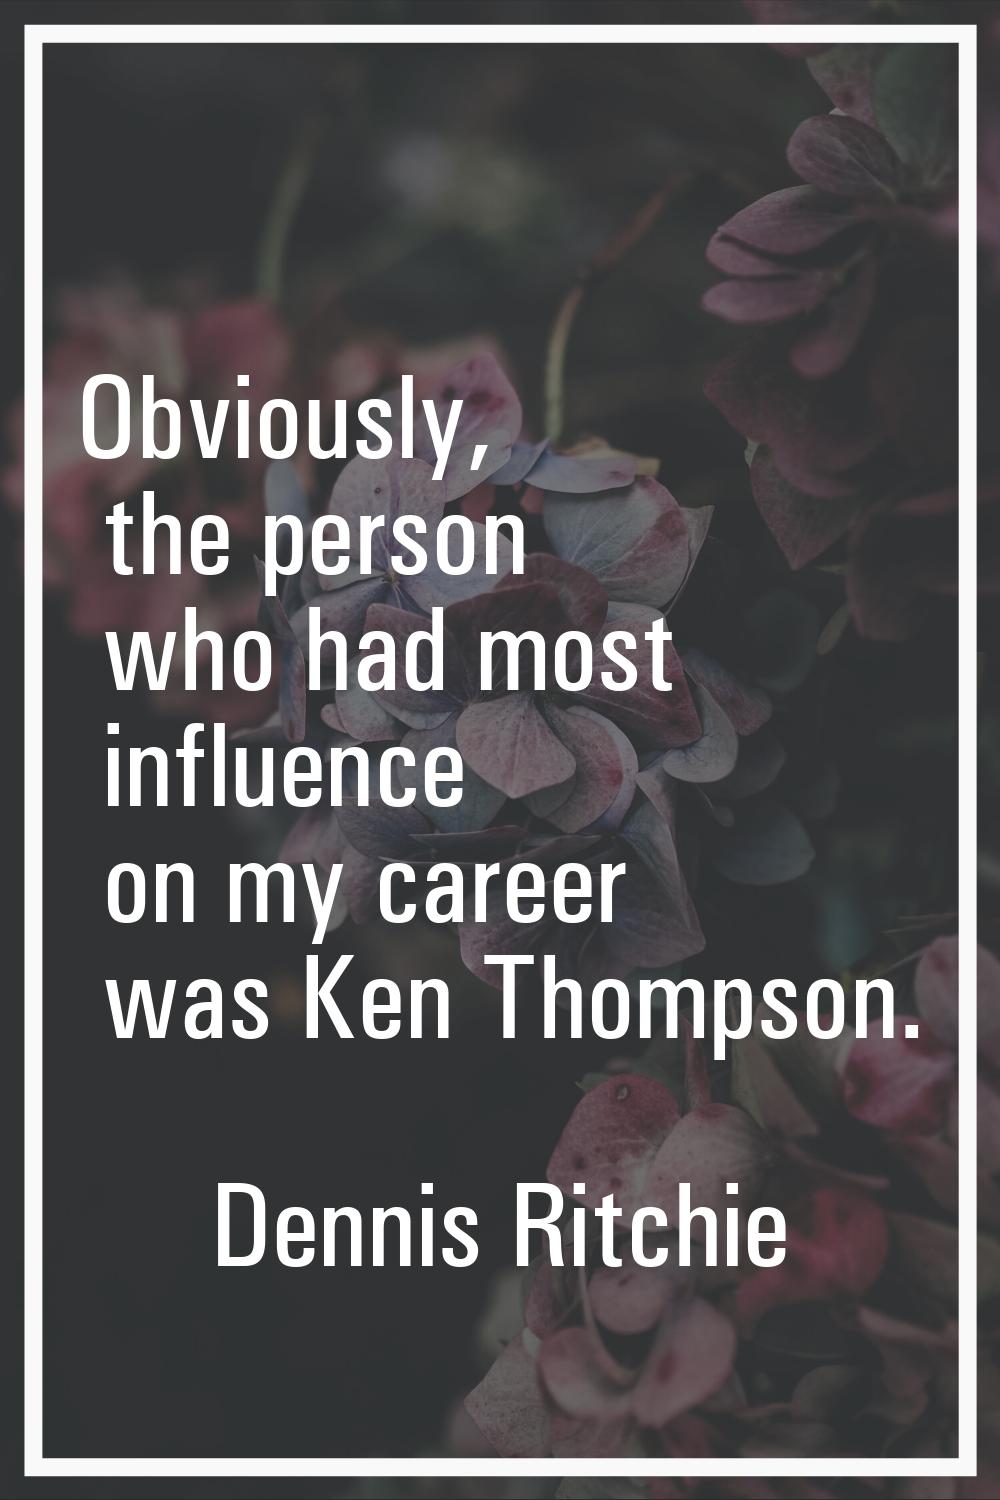 Obviously, the person who had most influence on my career was Ken Thompson.